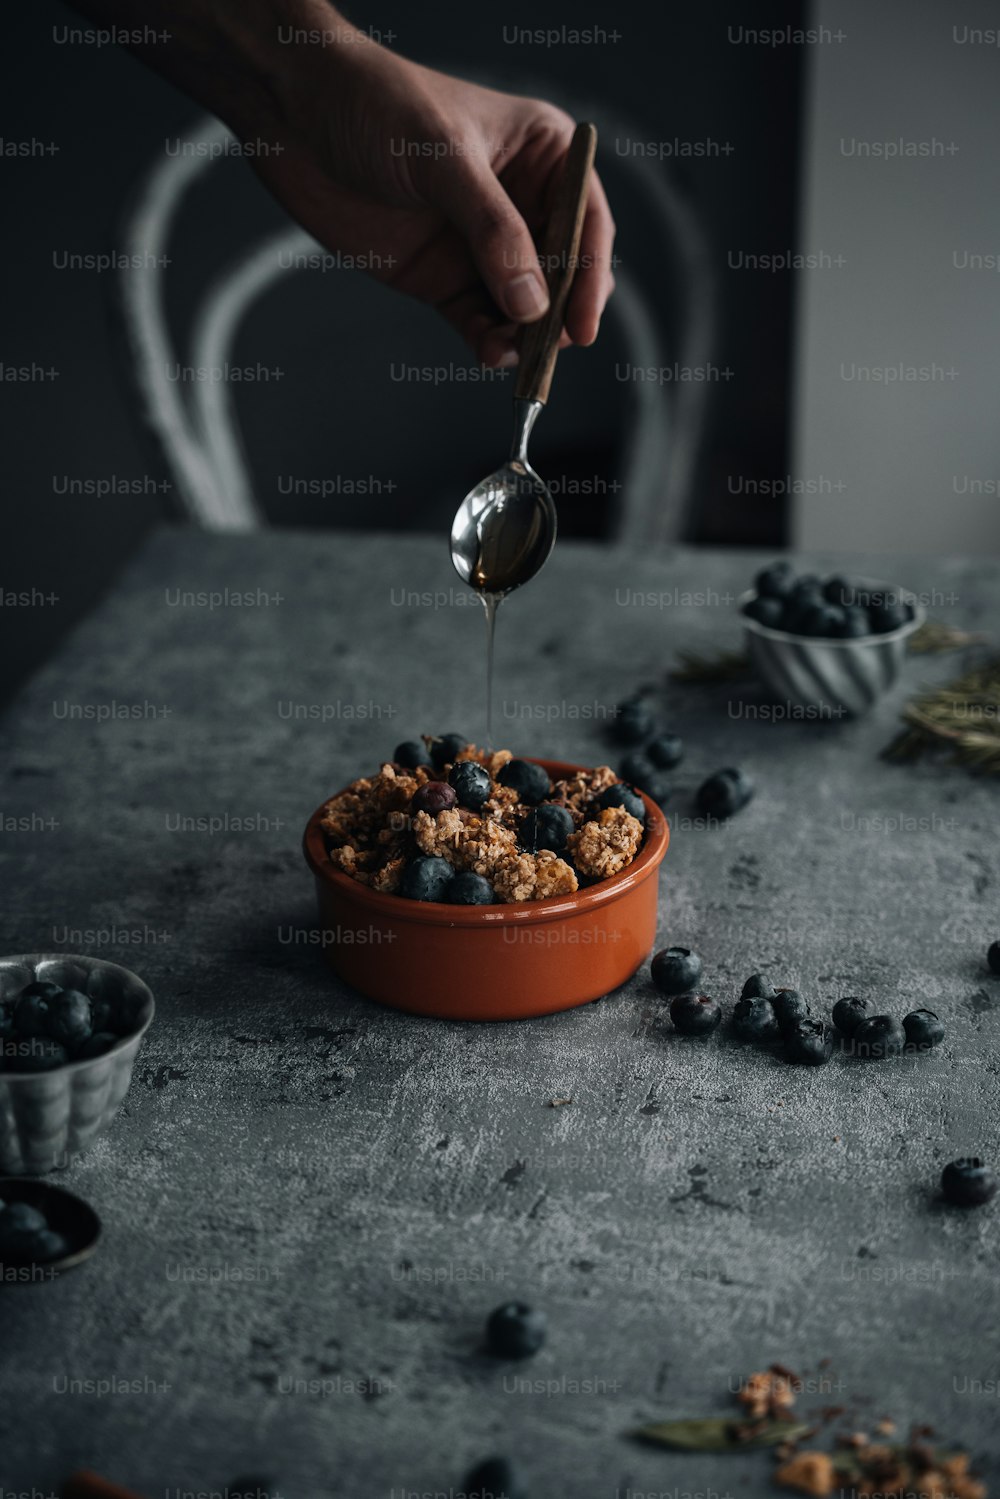 a person is spooning blueberries into a bowl